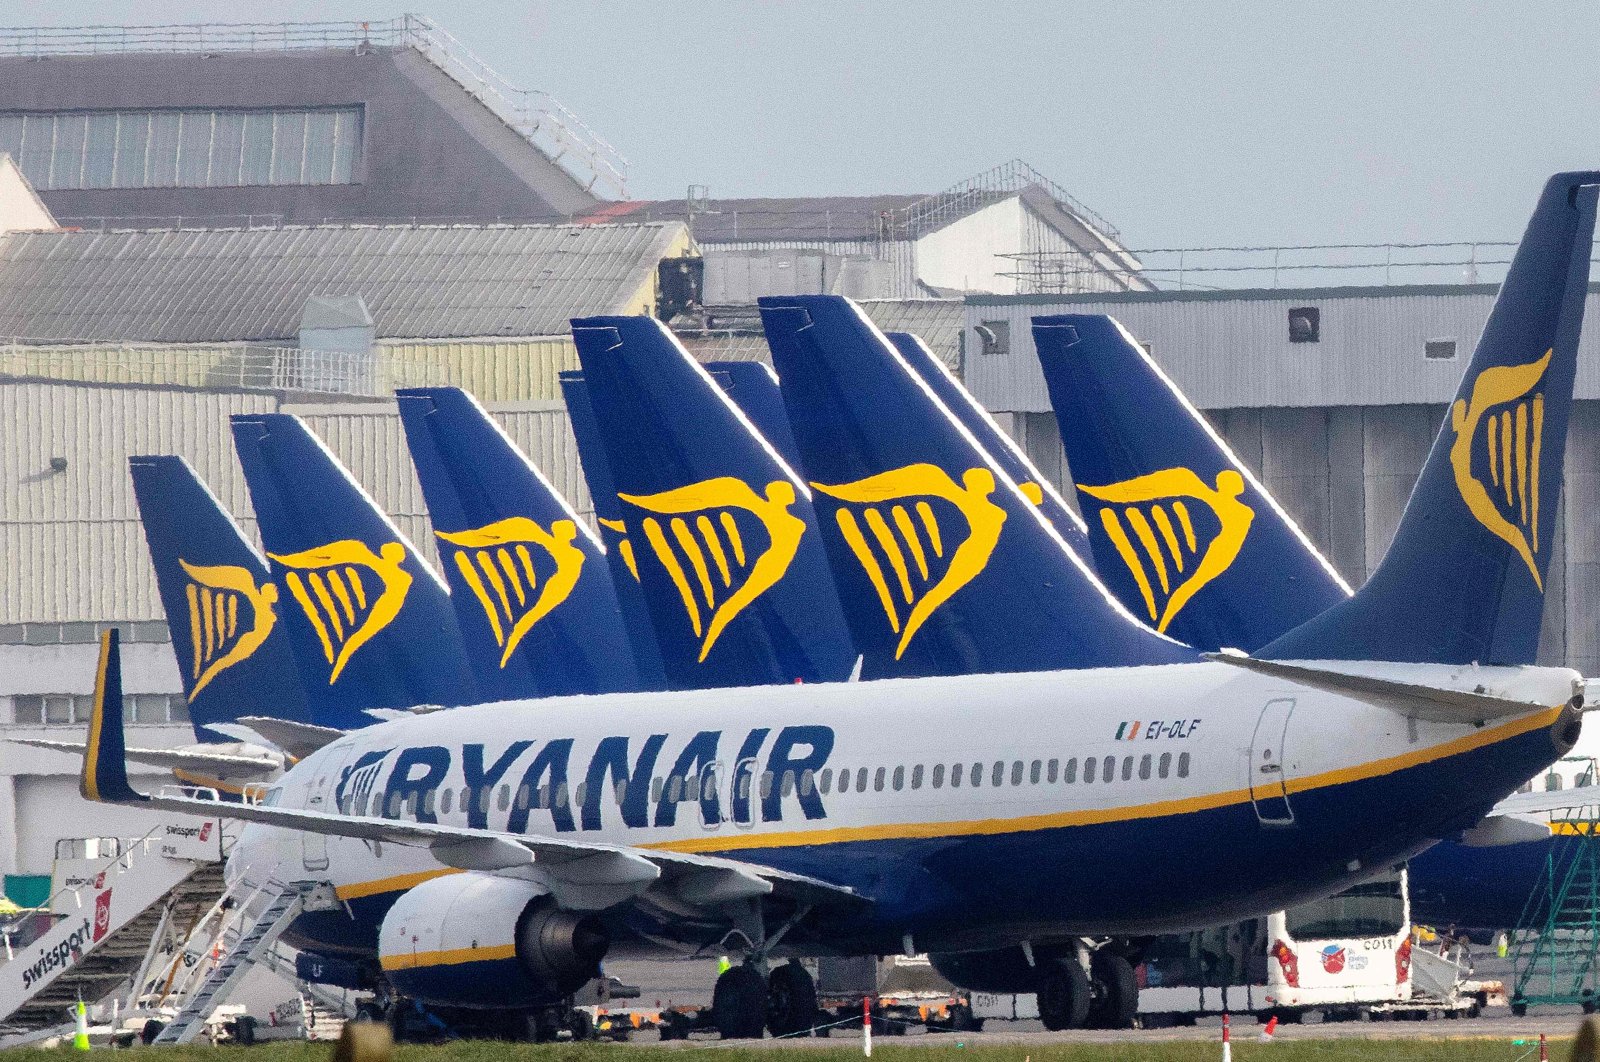 Ryanair passenger jets sit on the tarmac at the Dublin airport, March 23, 2020.(AFP Photo)